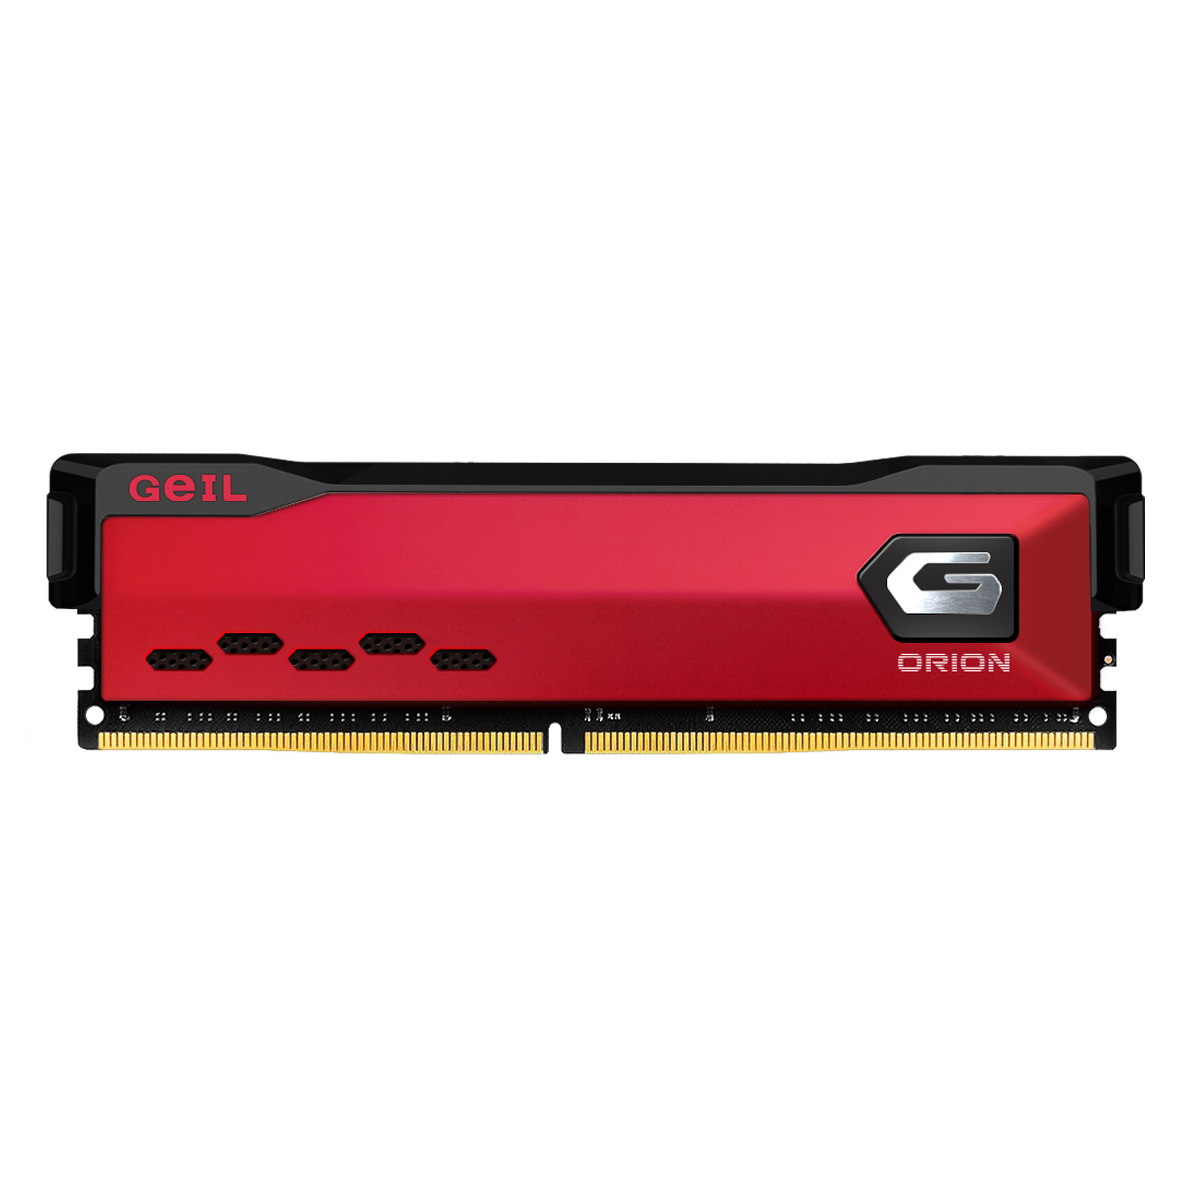 BỘ NHỚ TRONG GEIL ORION RED 8GB DDR4 3200MHZ